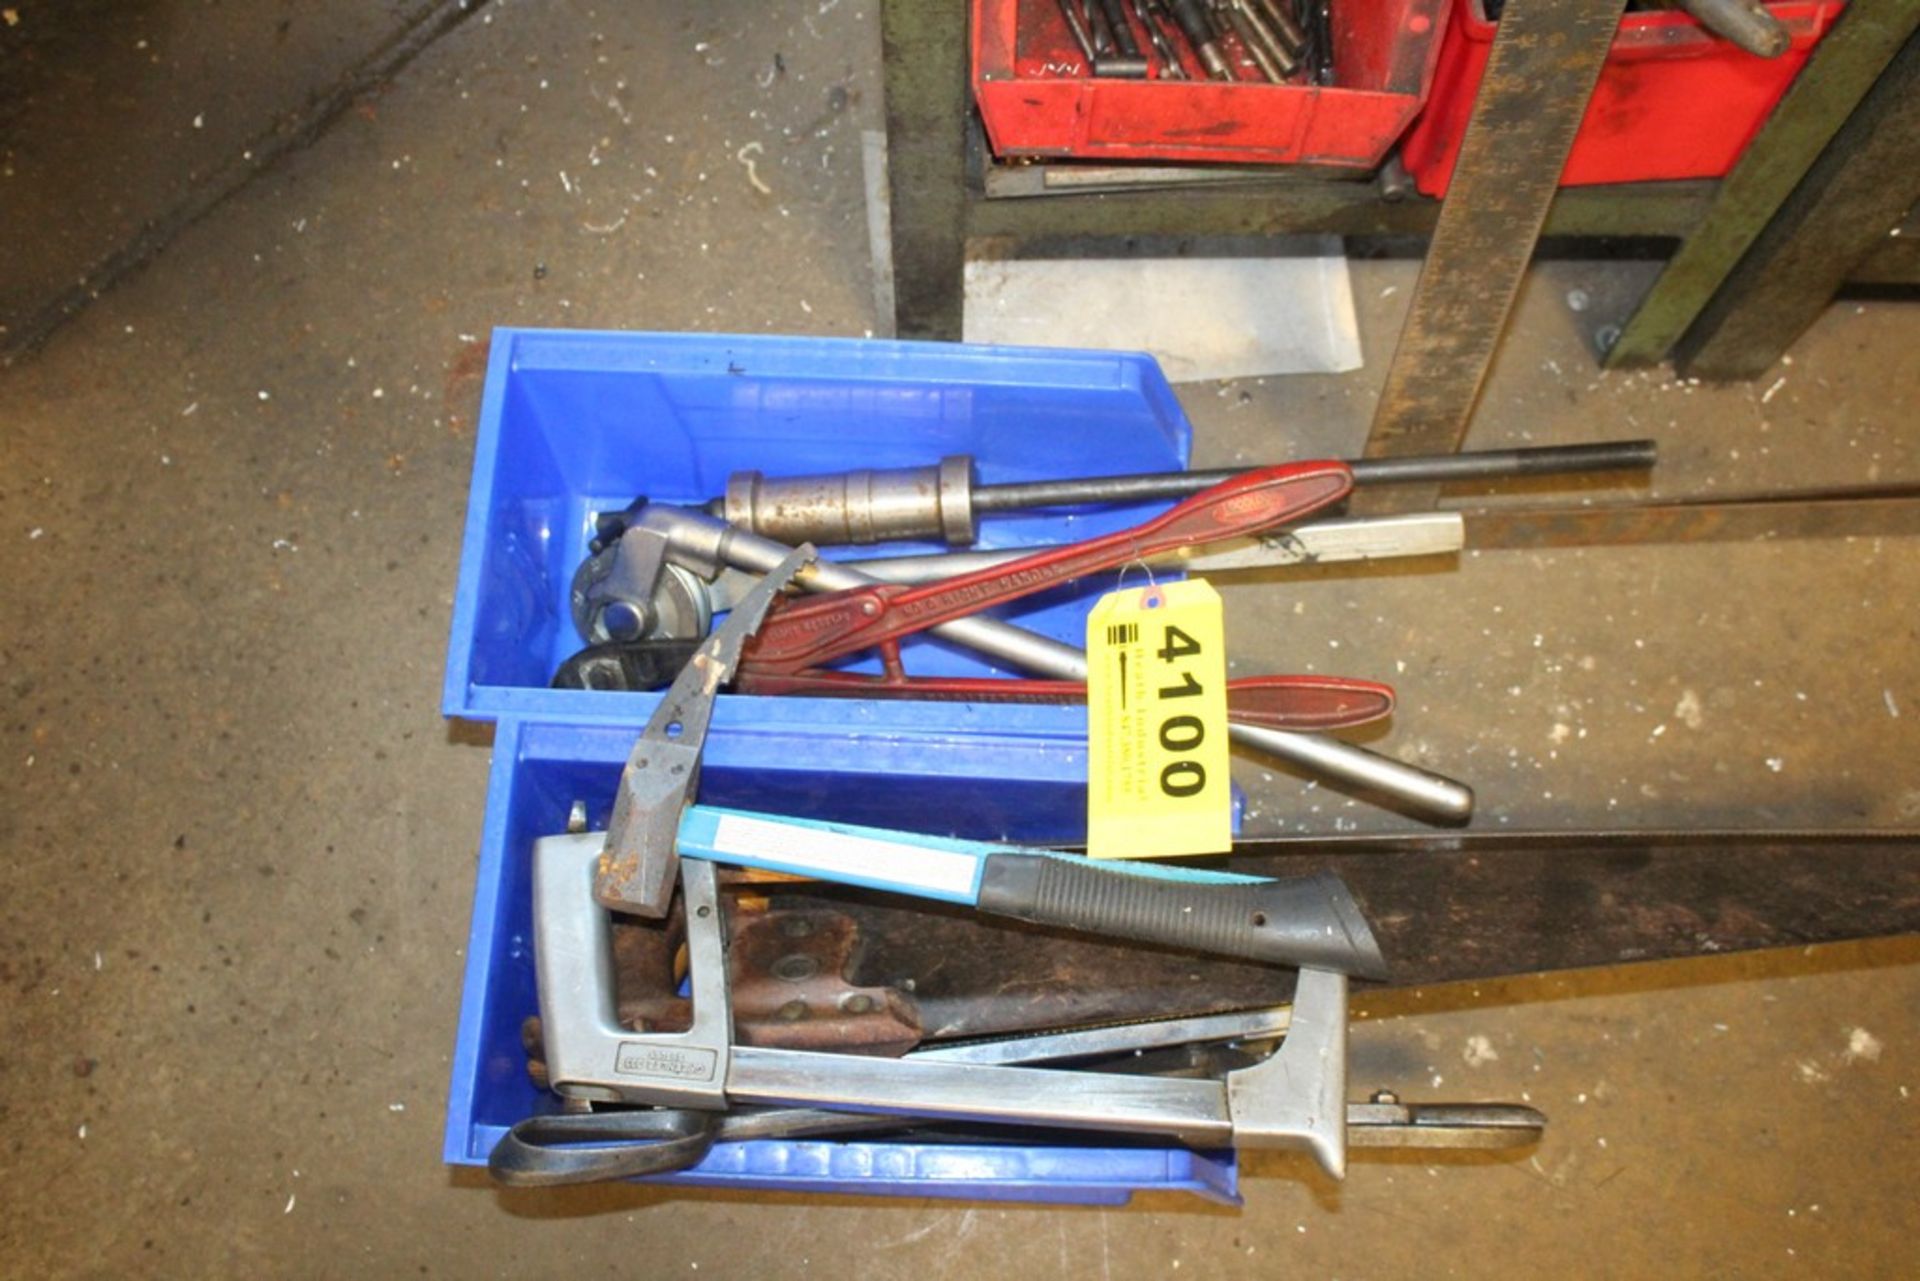 ASSORTED TOOLS IN TWO BINS (SAWS, TUBING BENDER, BOLT CUTTER, ETC)